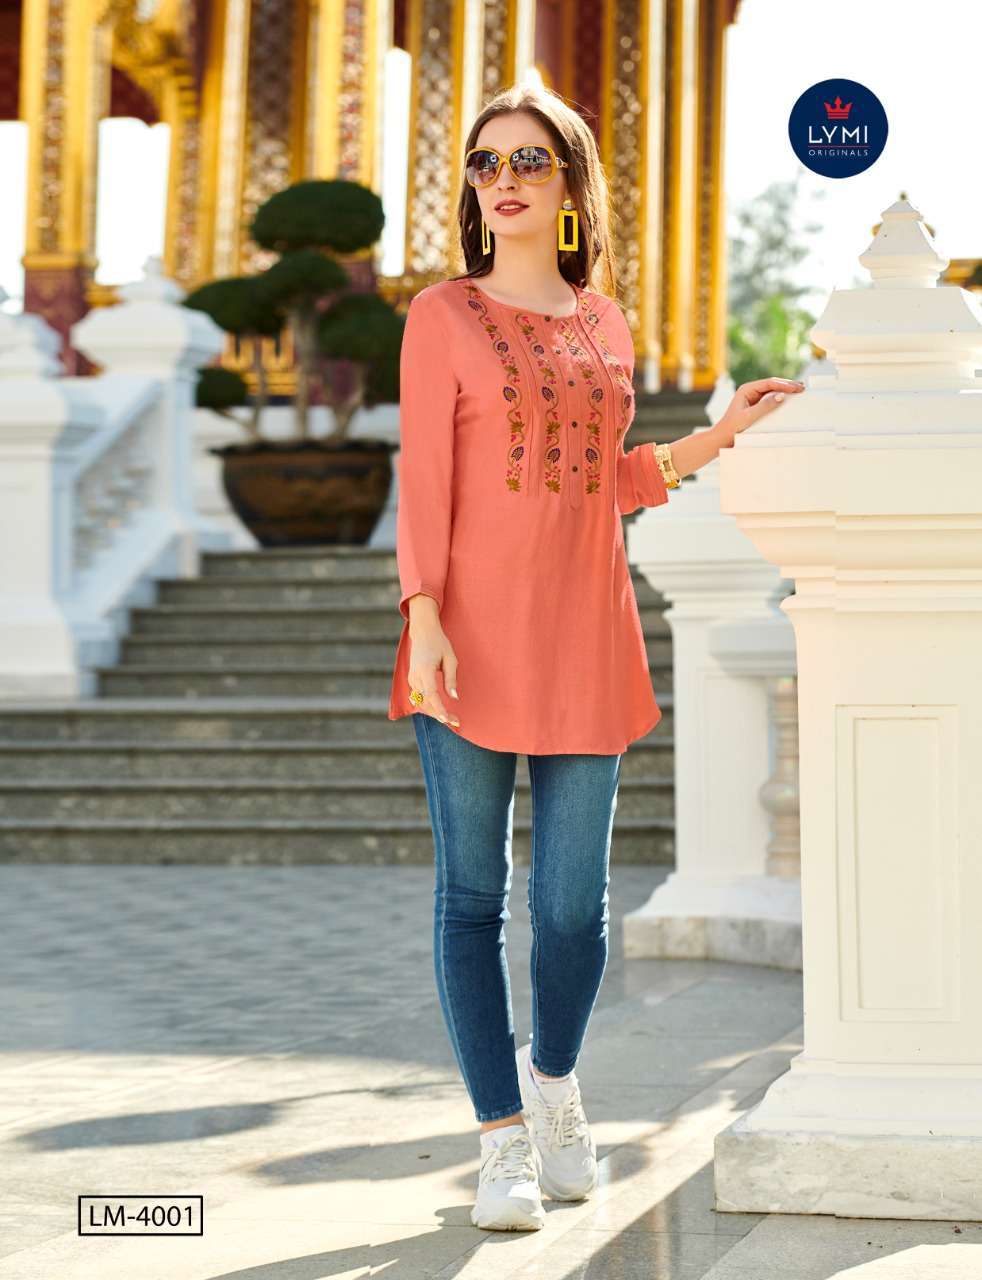 CANON BY LYMI ORIGINAL 4001 TO 4004 SERIES BEAUTIFUL STYLISH COLORFUL FANCY PARTY WEAR & ETHNIC WEAR & READY TO WEAR VISCOSE MOOS WITH EMBROIDERY KURTIS AT WHOLESALE PRICE